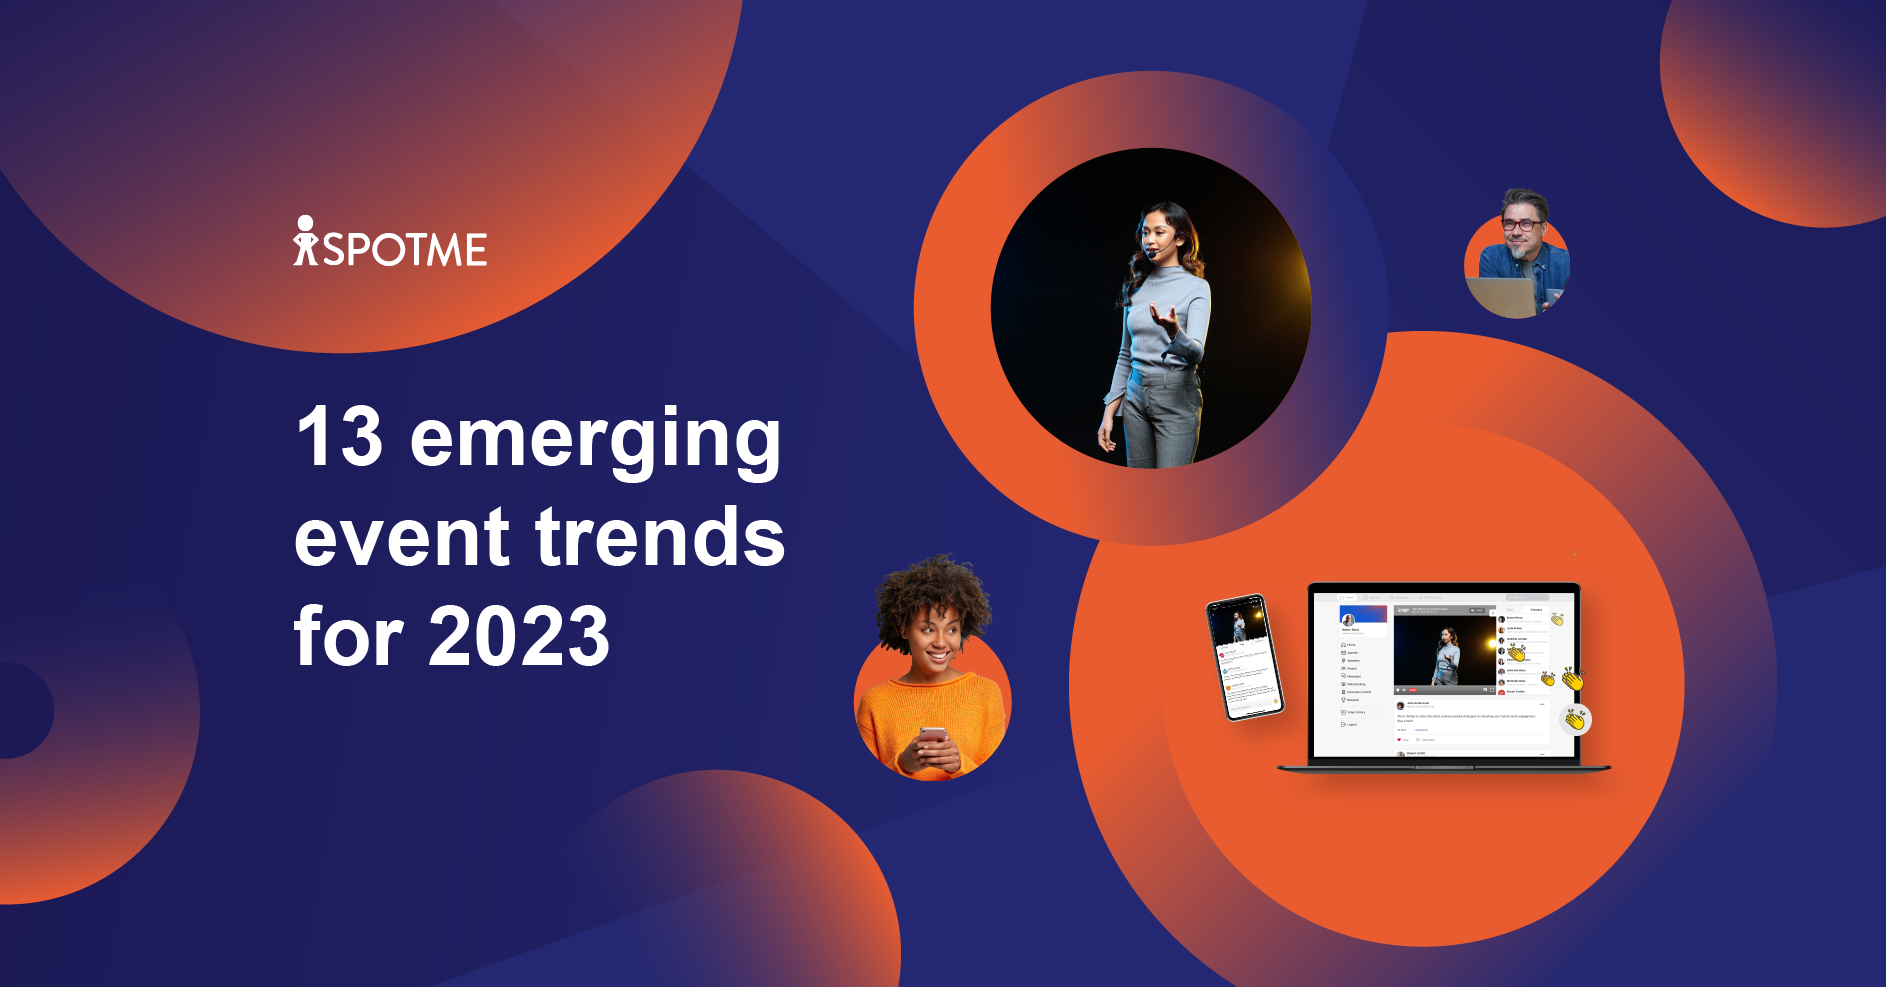 13 corporate event trends that will make your events stand out in 2023